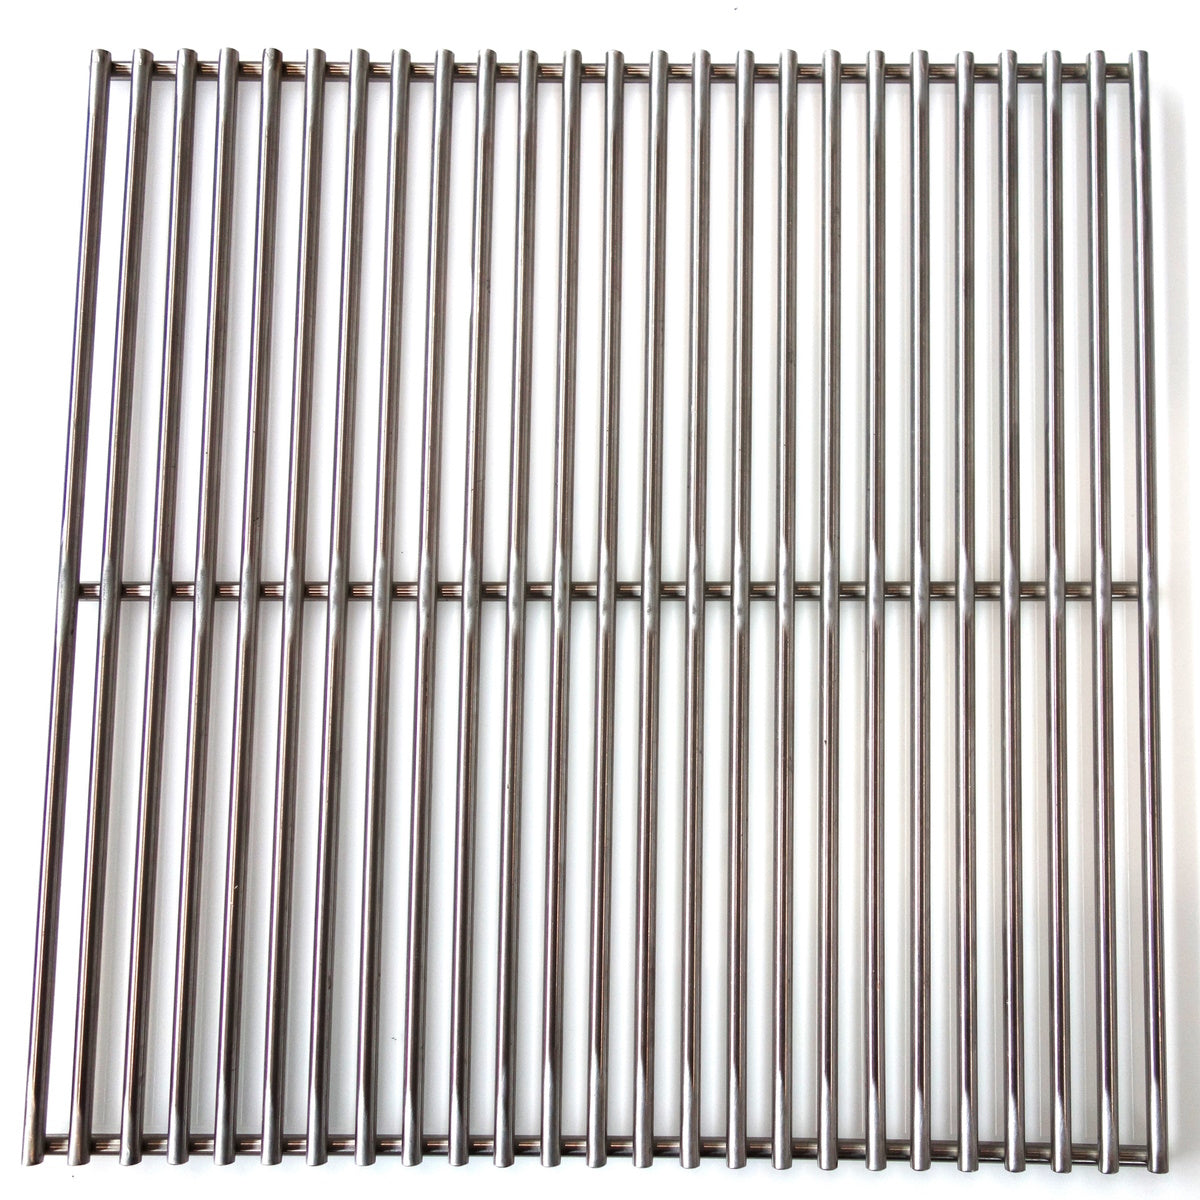 Tucker Stainless Steel Grill 400mm